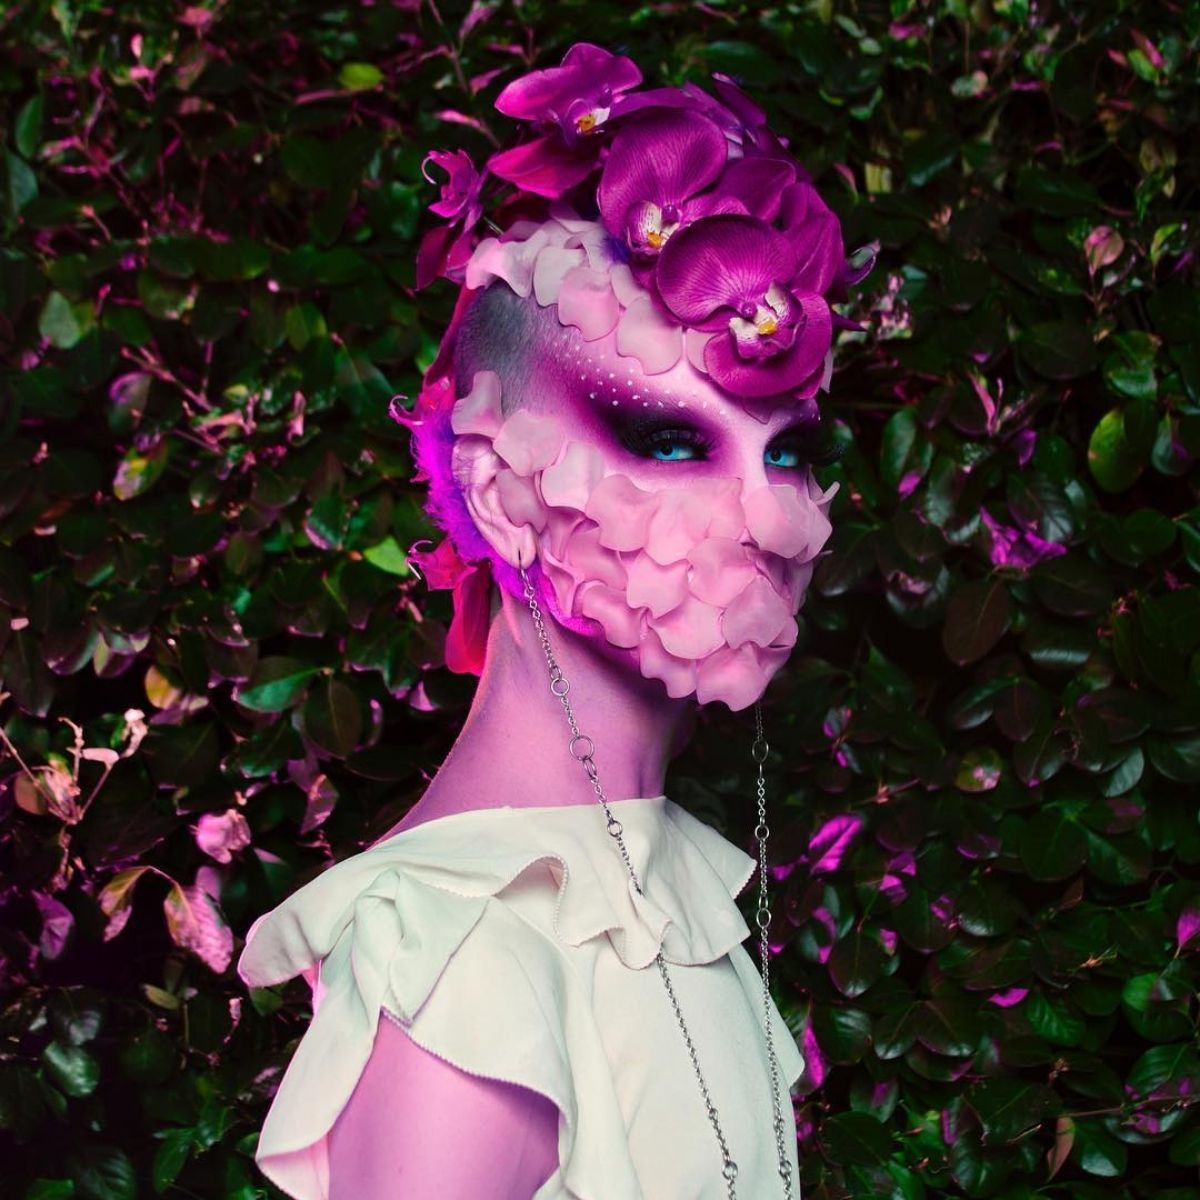 ryan-burke-transforms-subjects-into-otherworldly-personas-featured